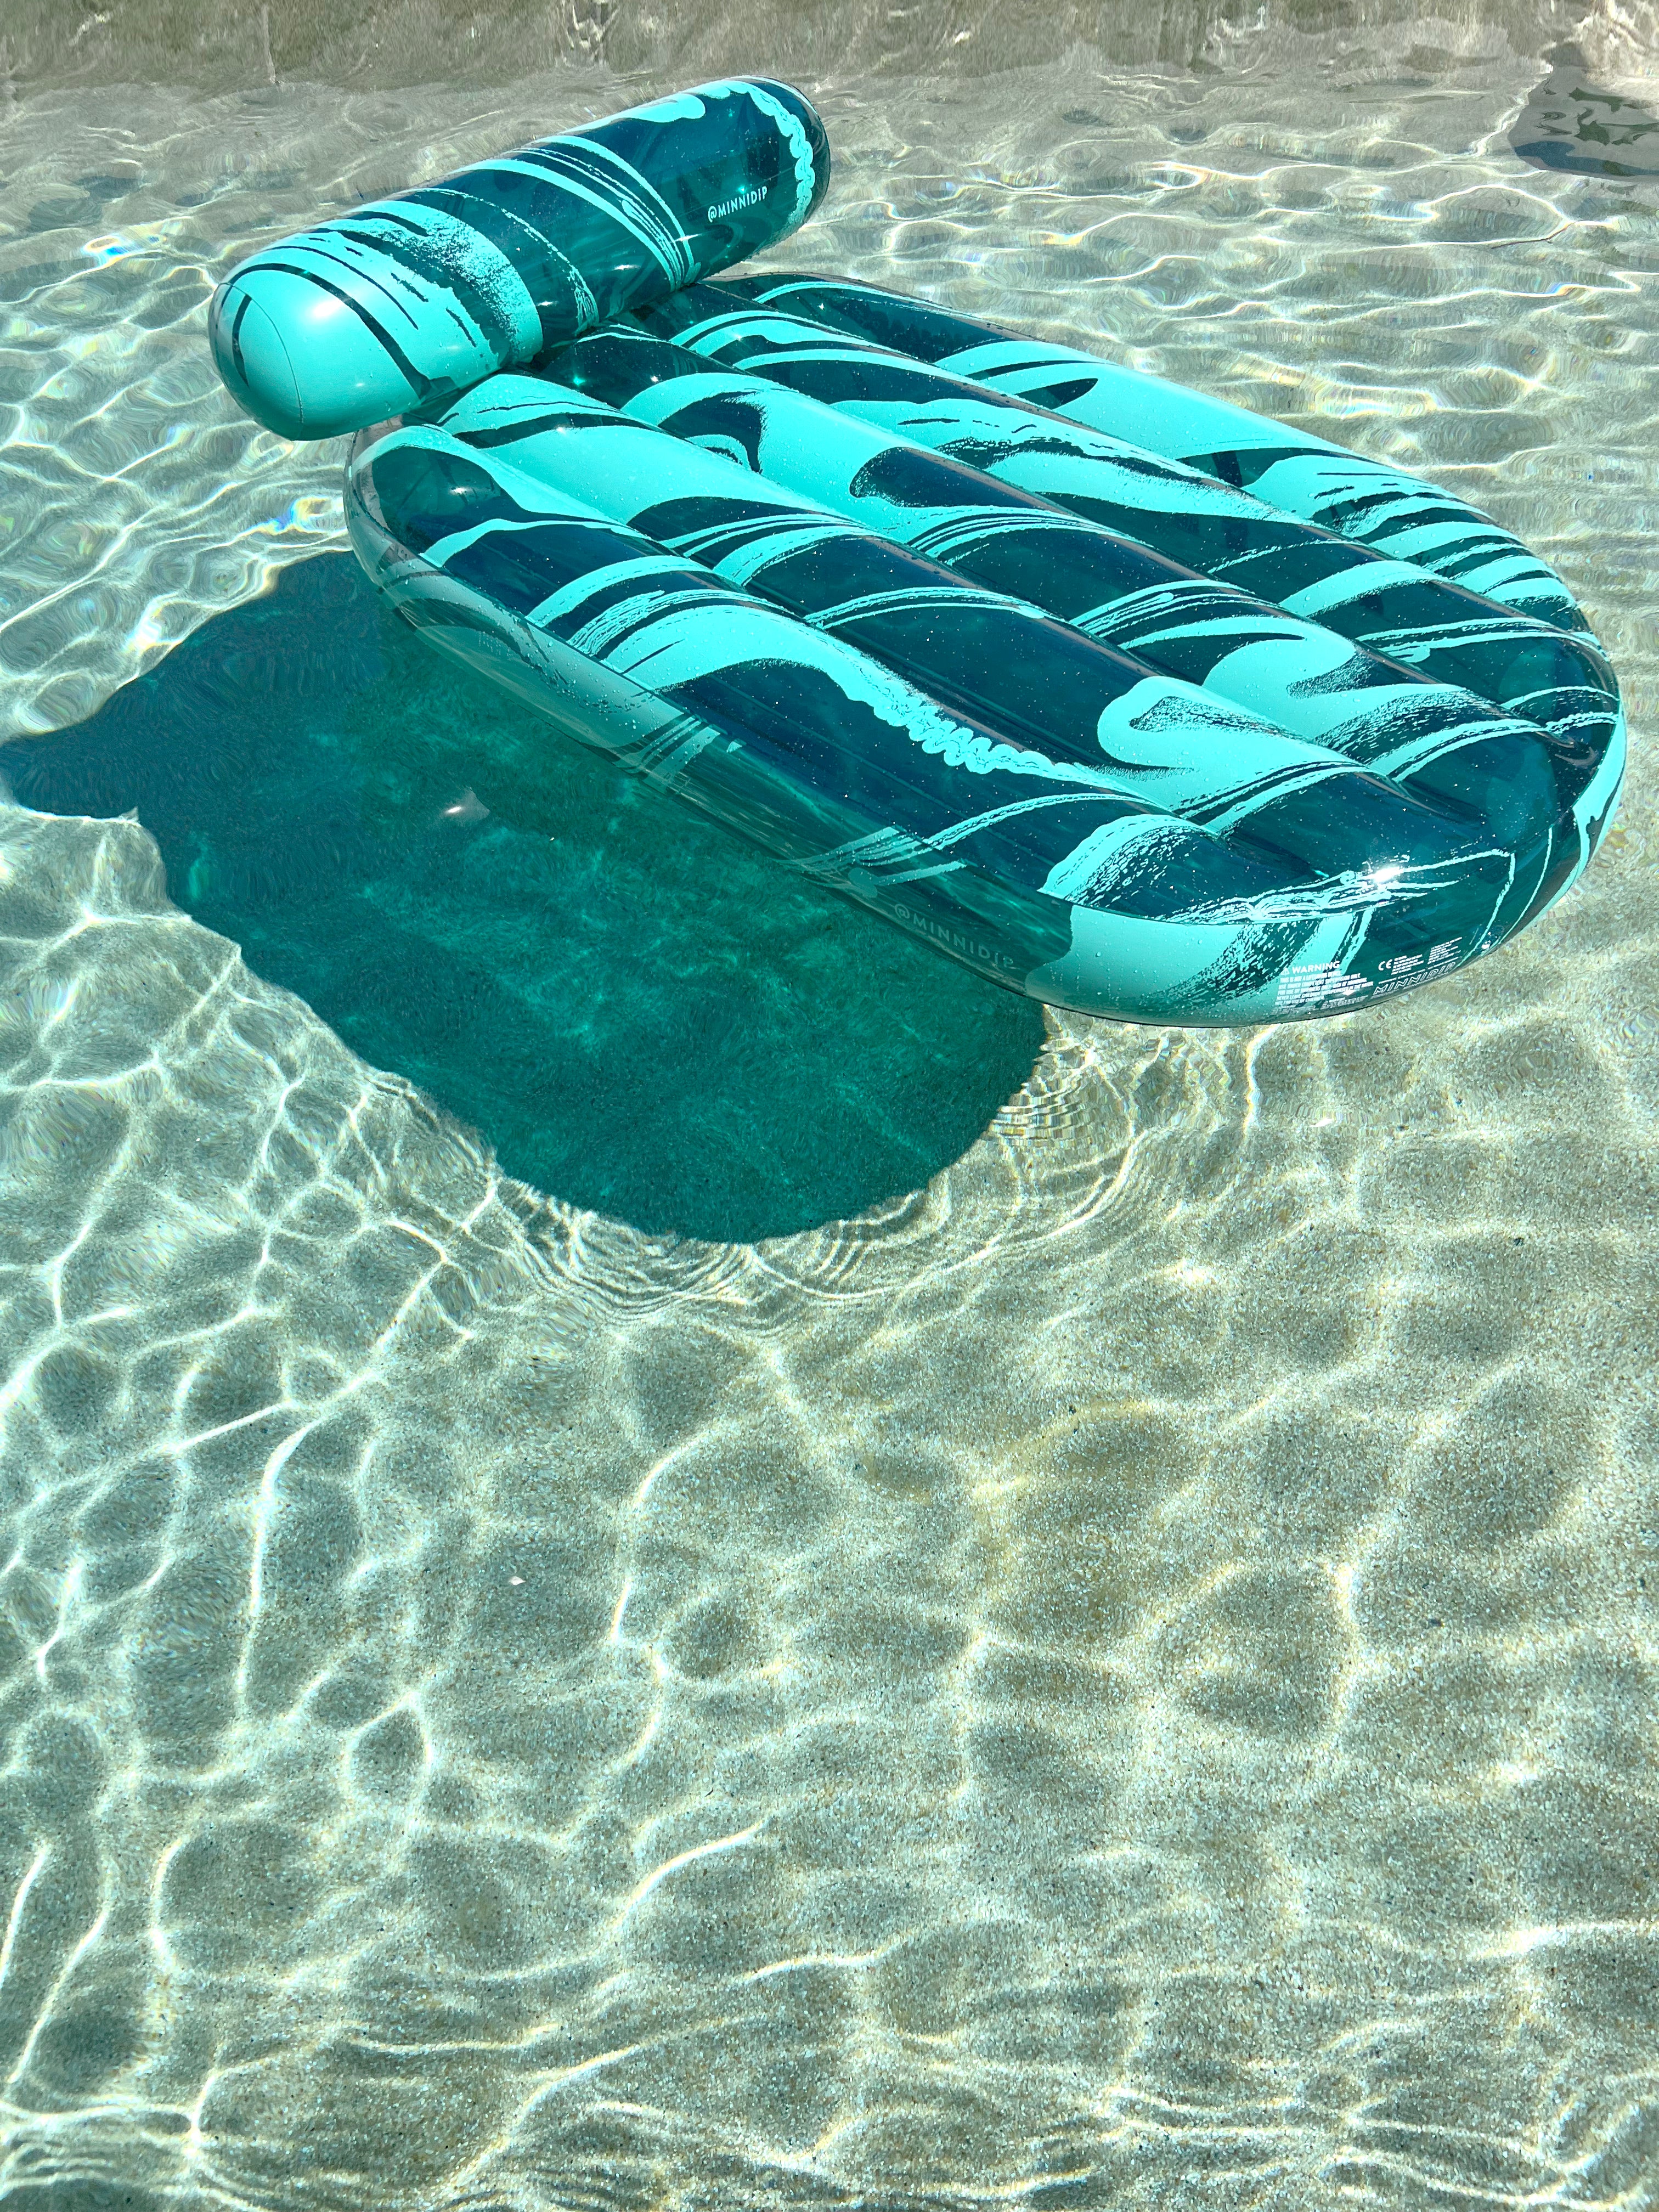 the MURANO Luxe Inflatable Daybed Lounger